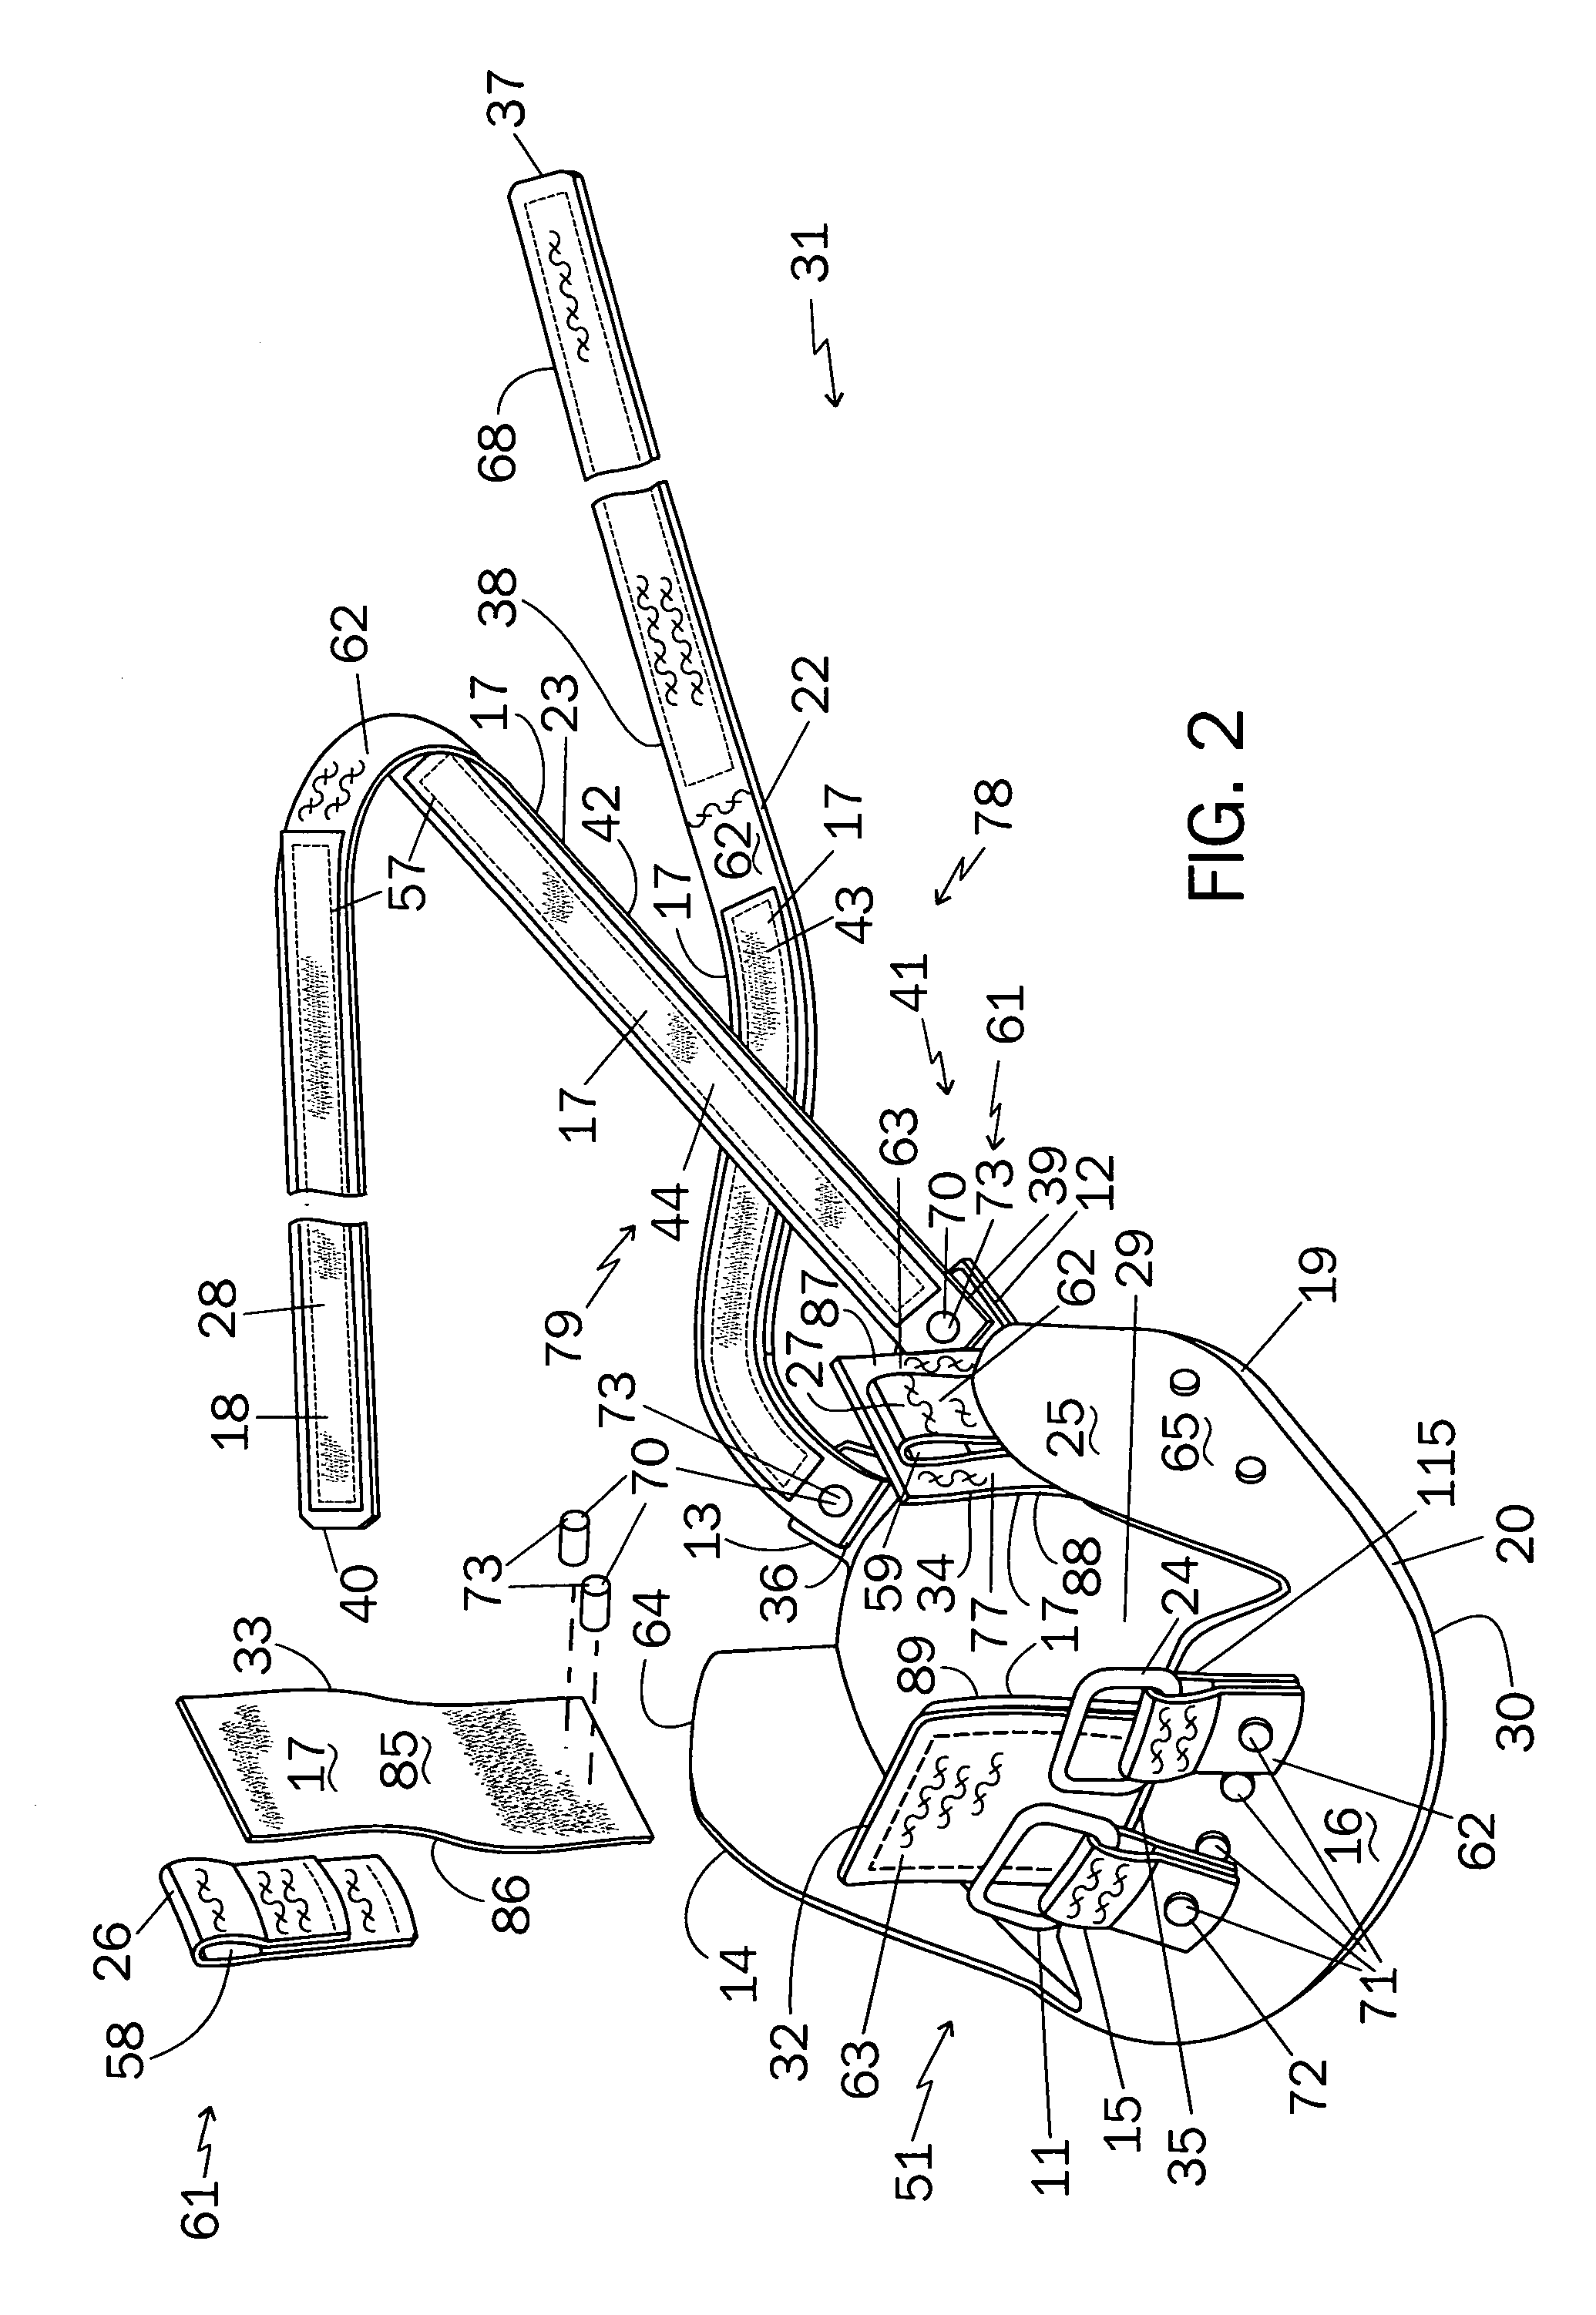 Hoof boot for hoofed animals and methods of making same